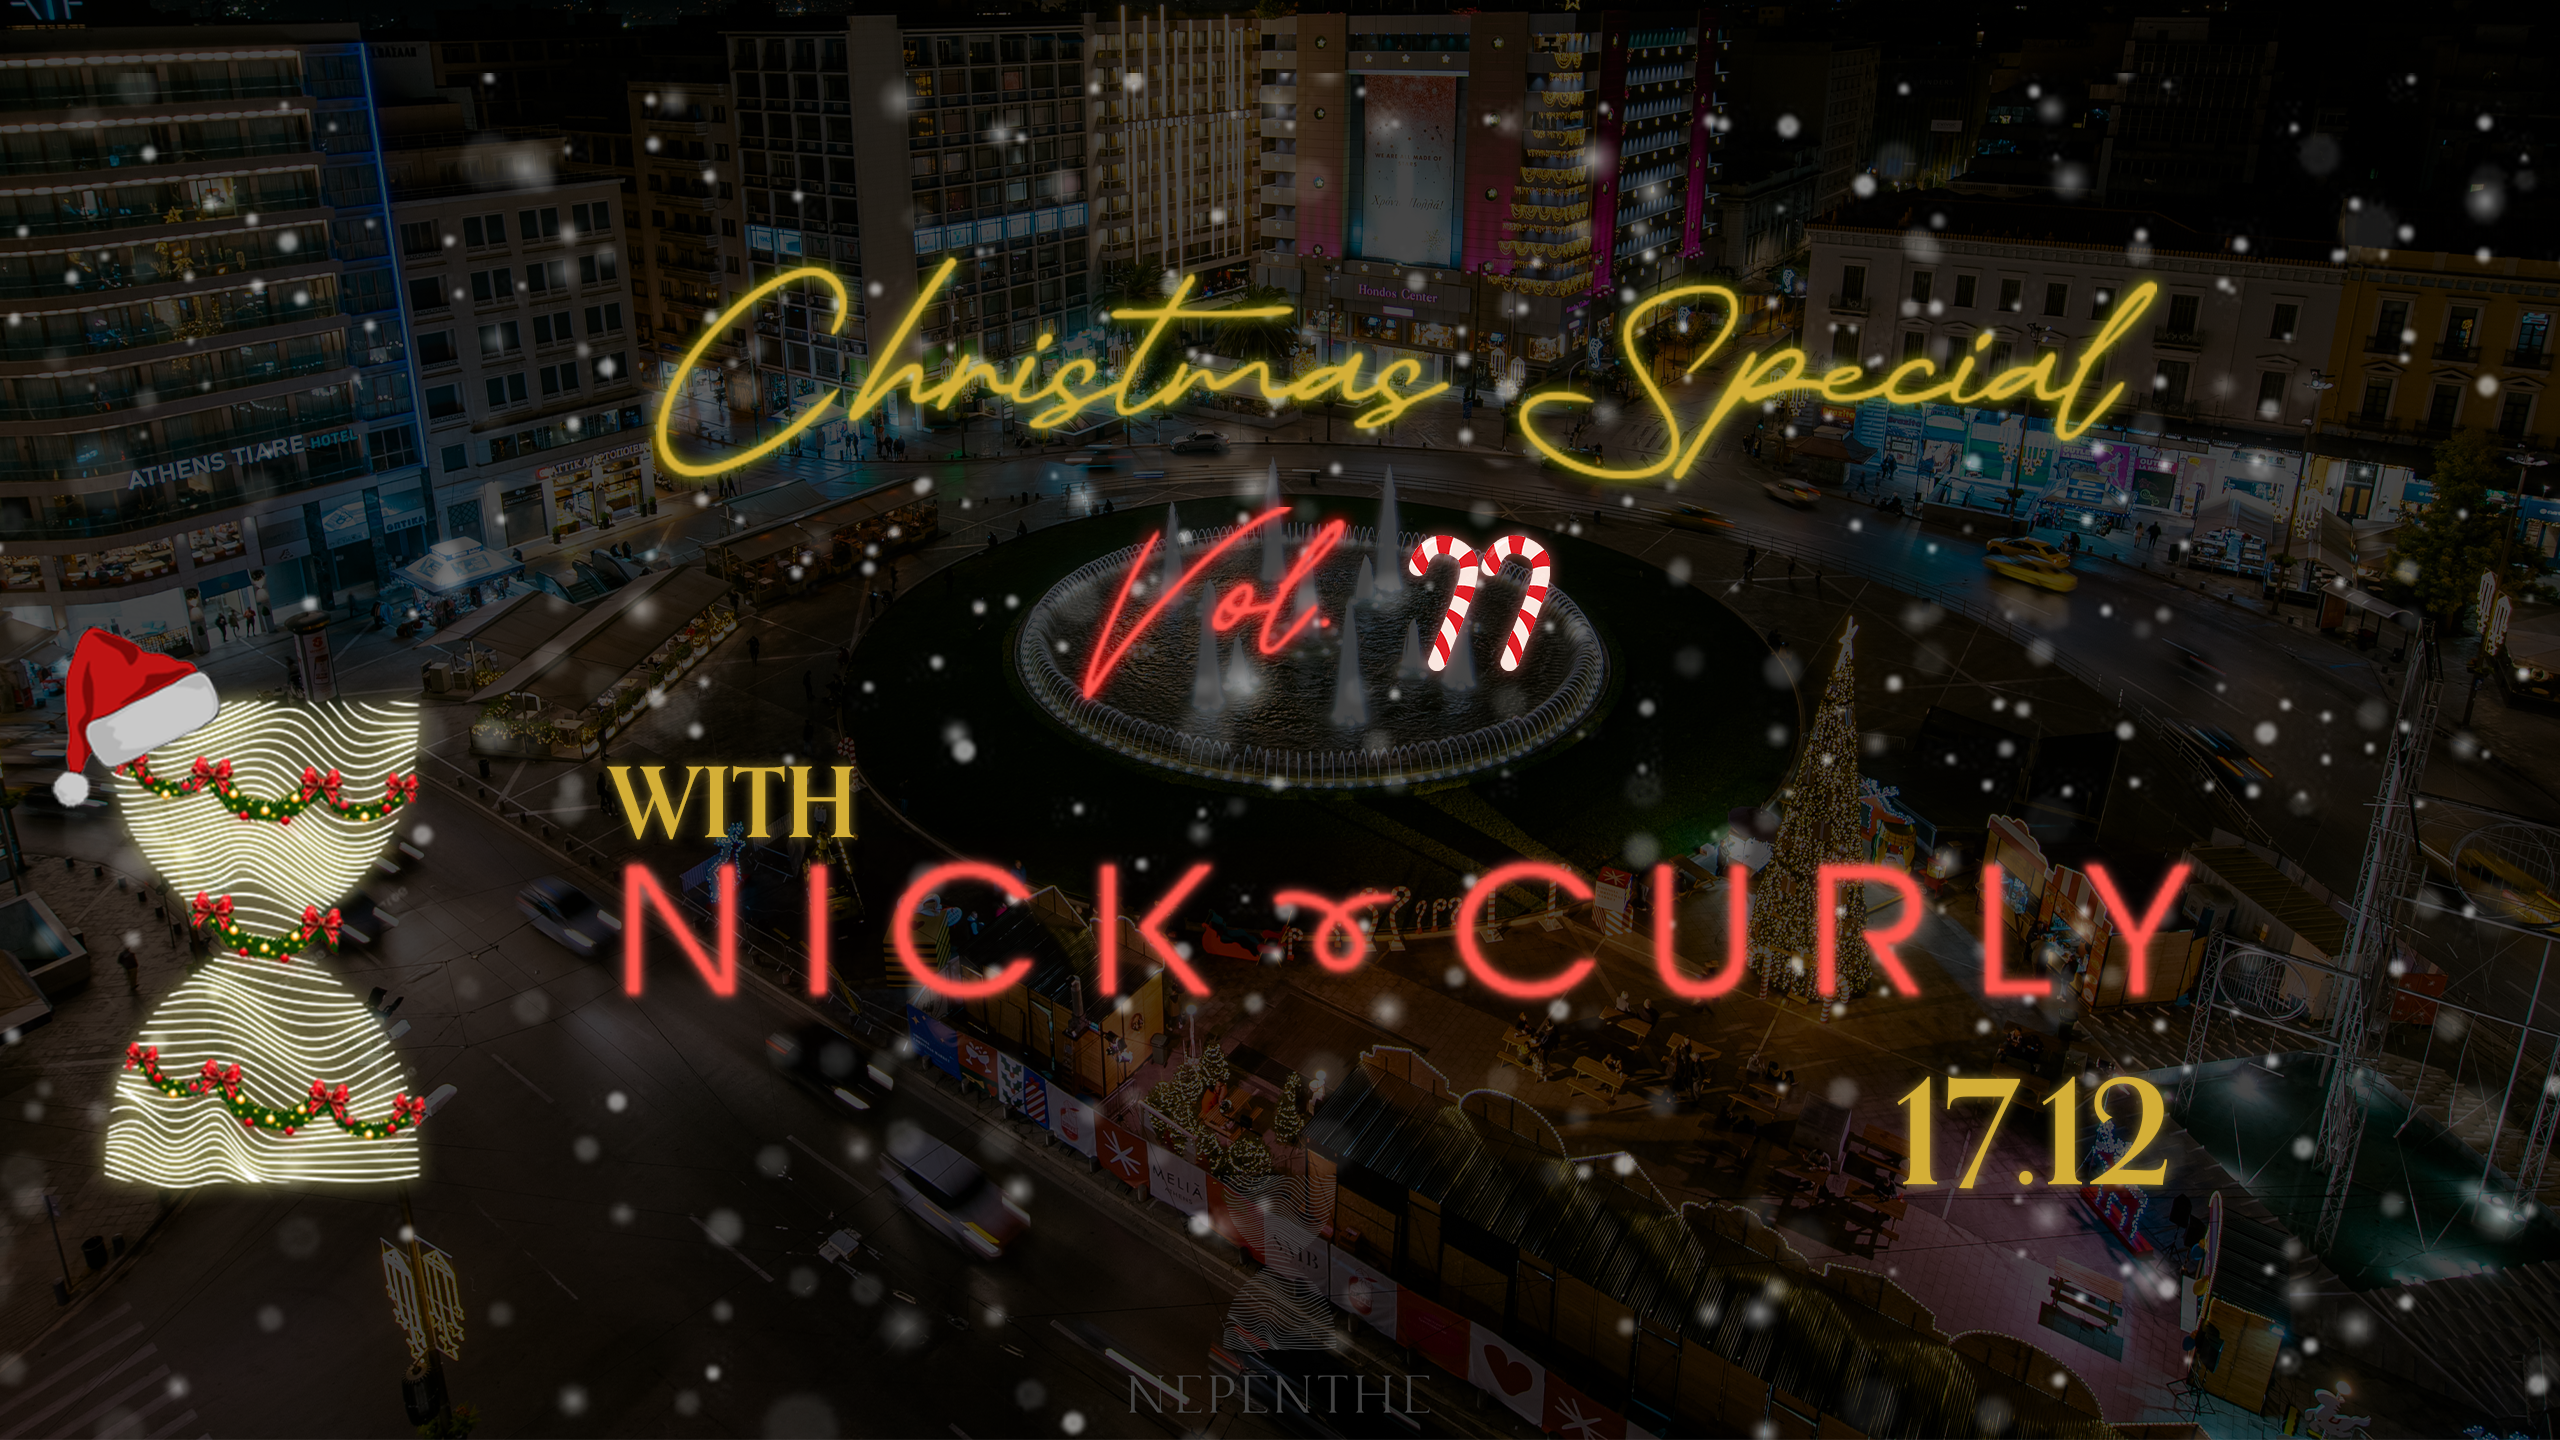 Nepenthe - Christmas Special Vol. II with Nick Curly - Página frontal